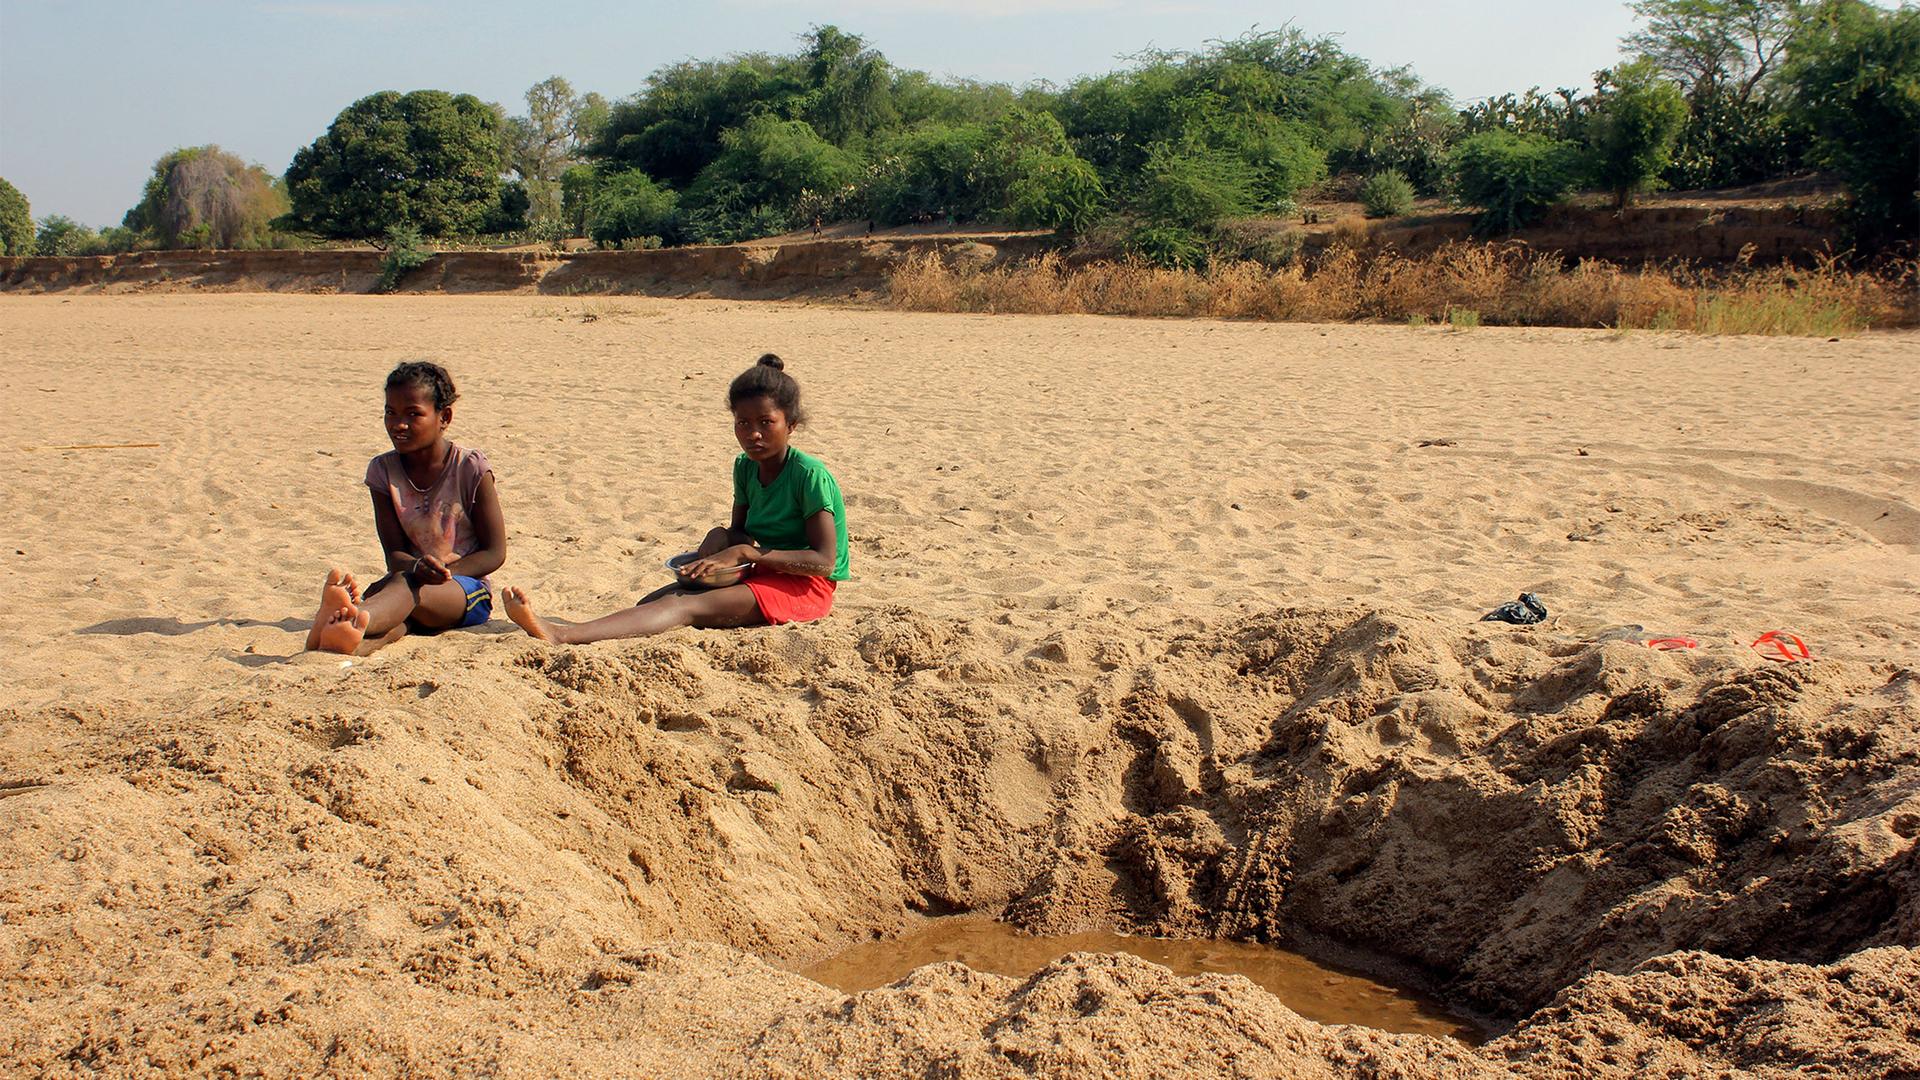 Children sit by a dug out water hole in a dry river bed in the remote village of Fenoarivo, Madagascar